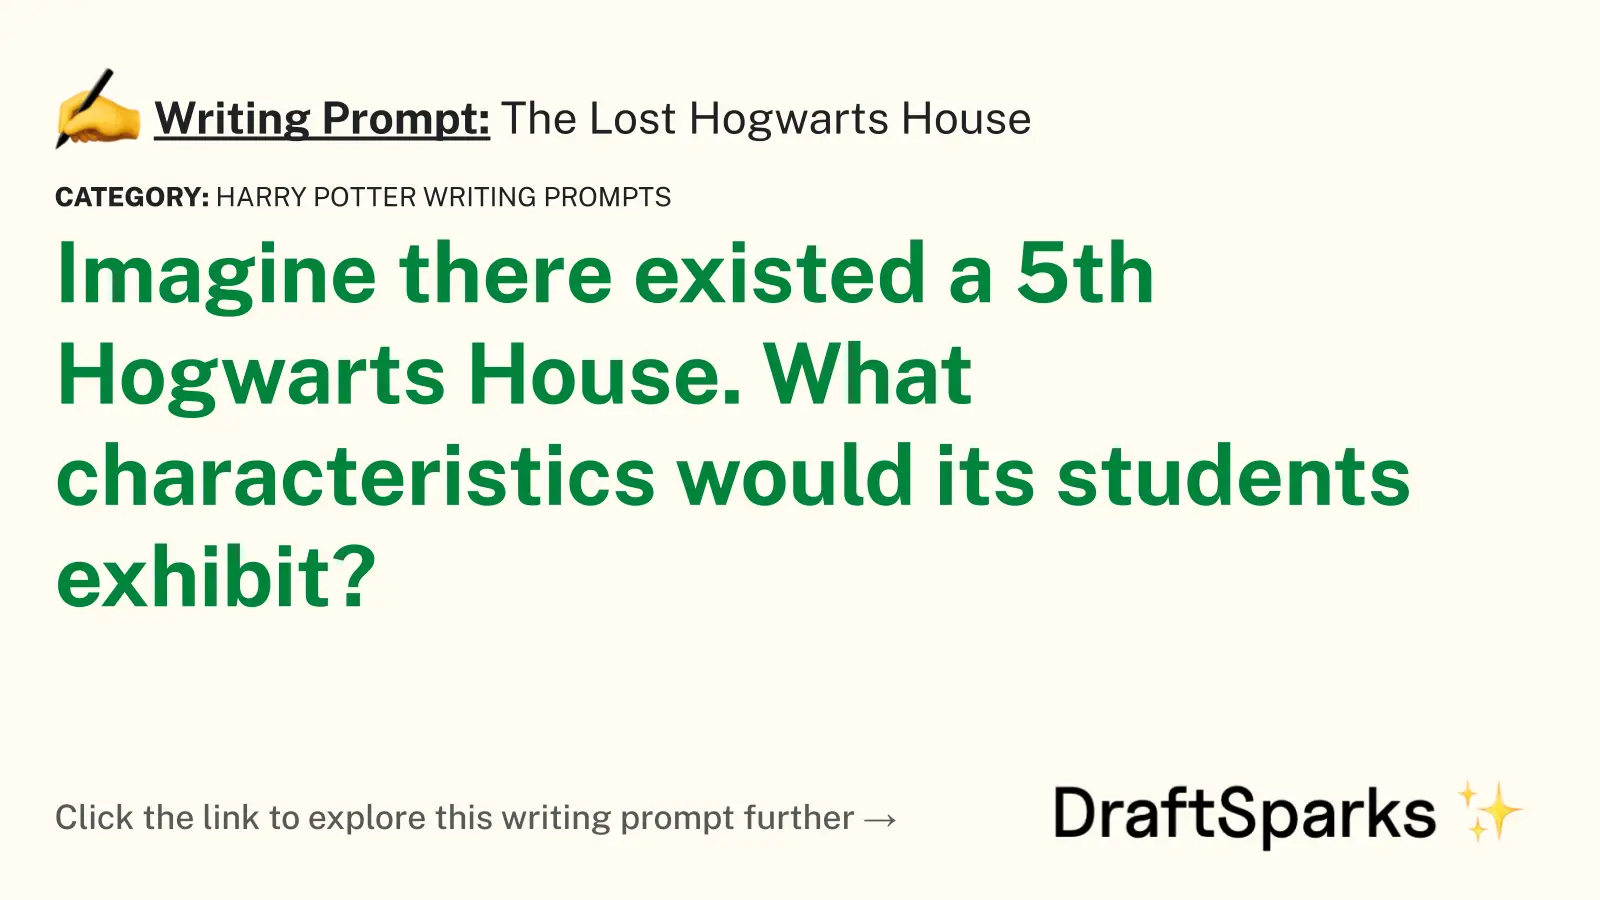 The Lost Hogwarts House